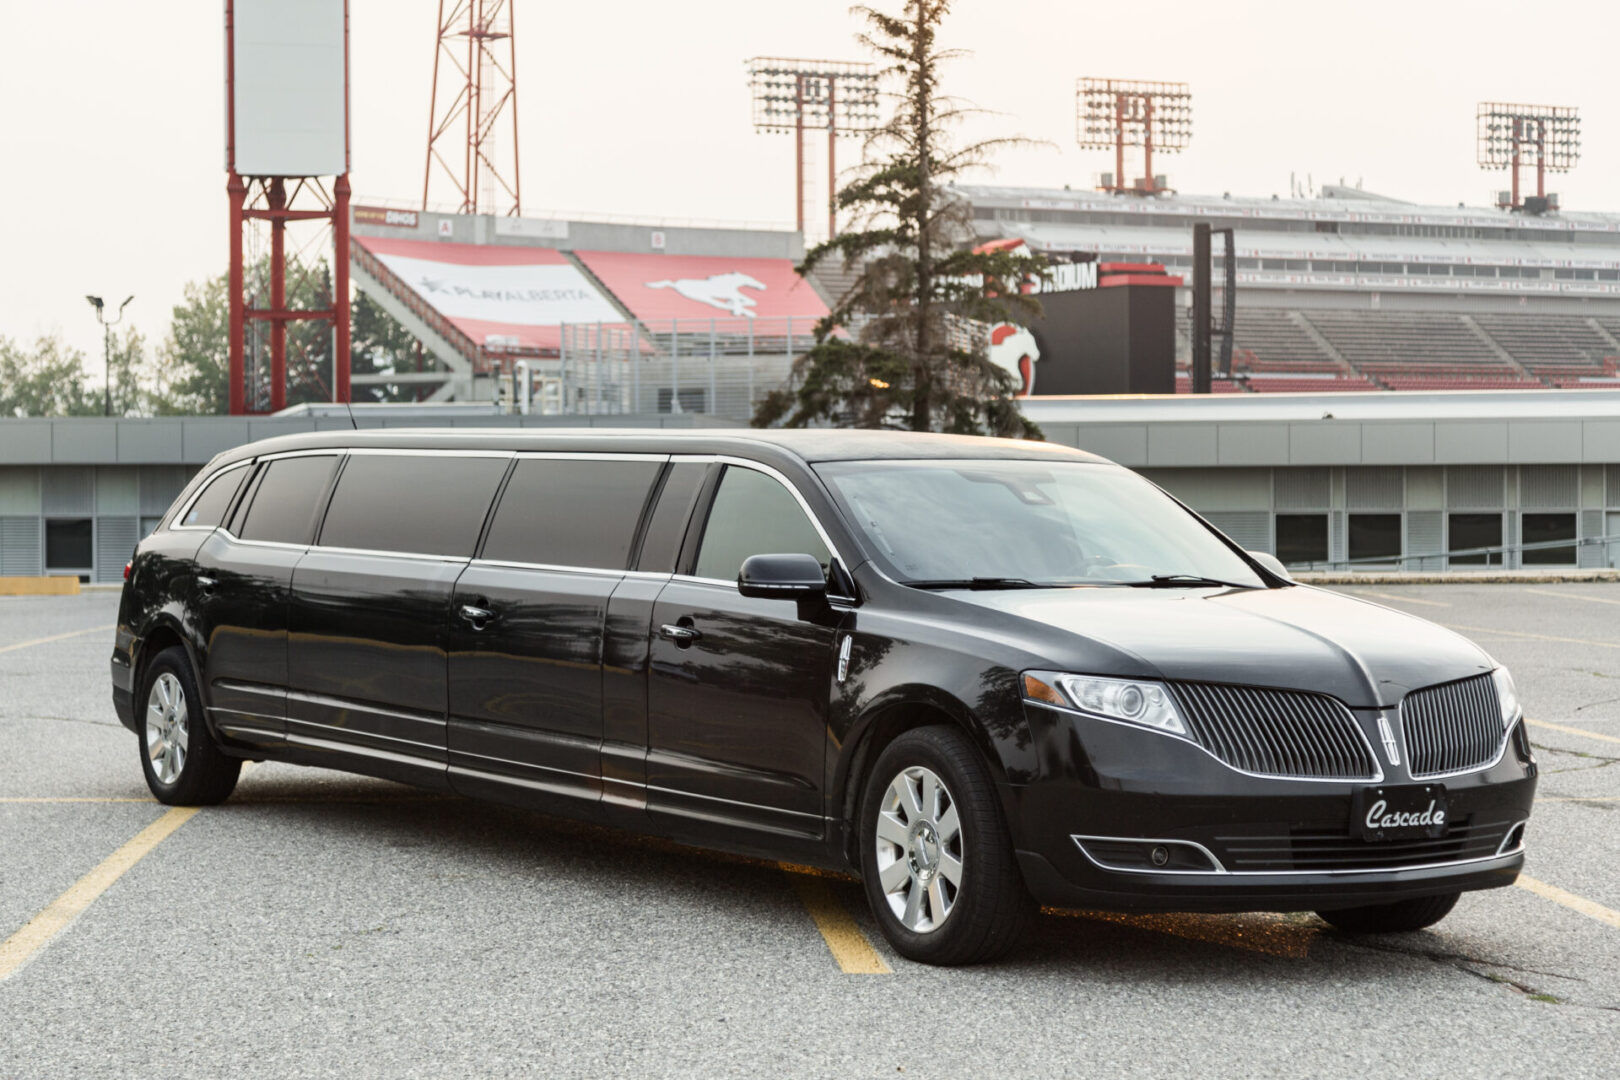 A black limousine parked in front of a stadium